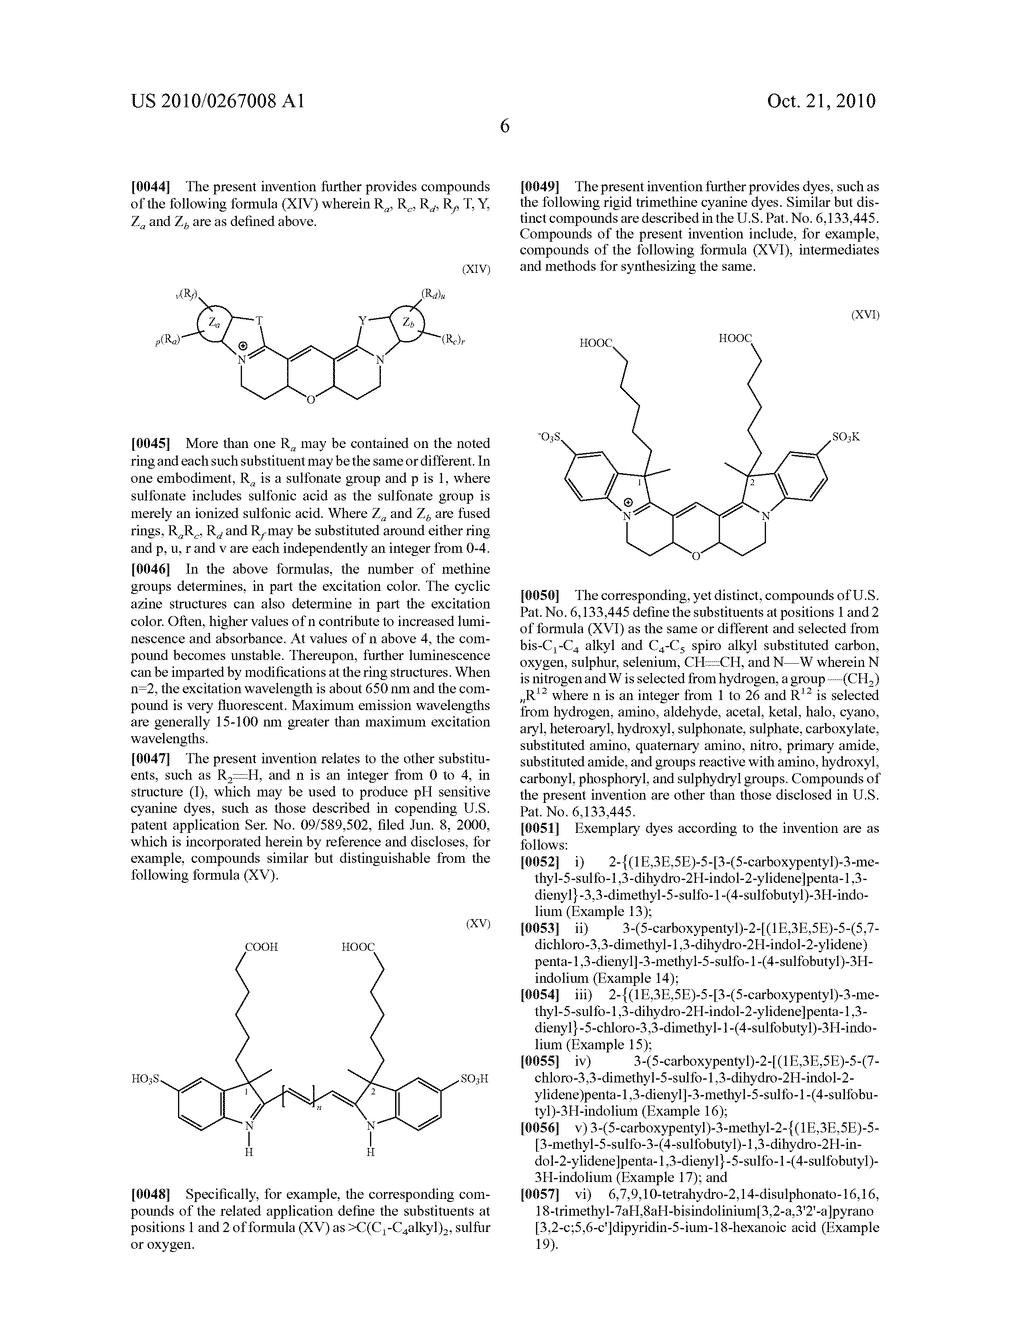 CHIRAL INDOLE INTERMEDIATES AND THEIR FLUORESCENT CYANINE DYES CONTAINING FUNCTIONAL GROUPS - diagram, schematic, and image 16